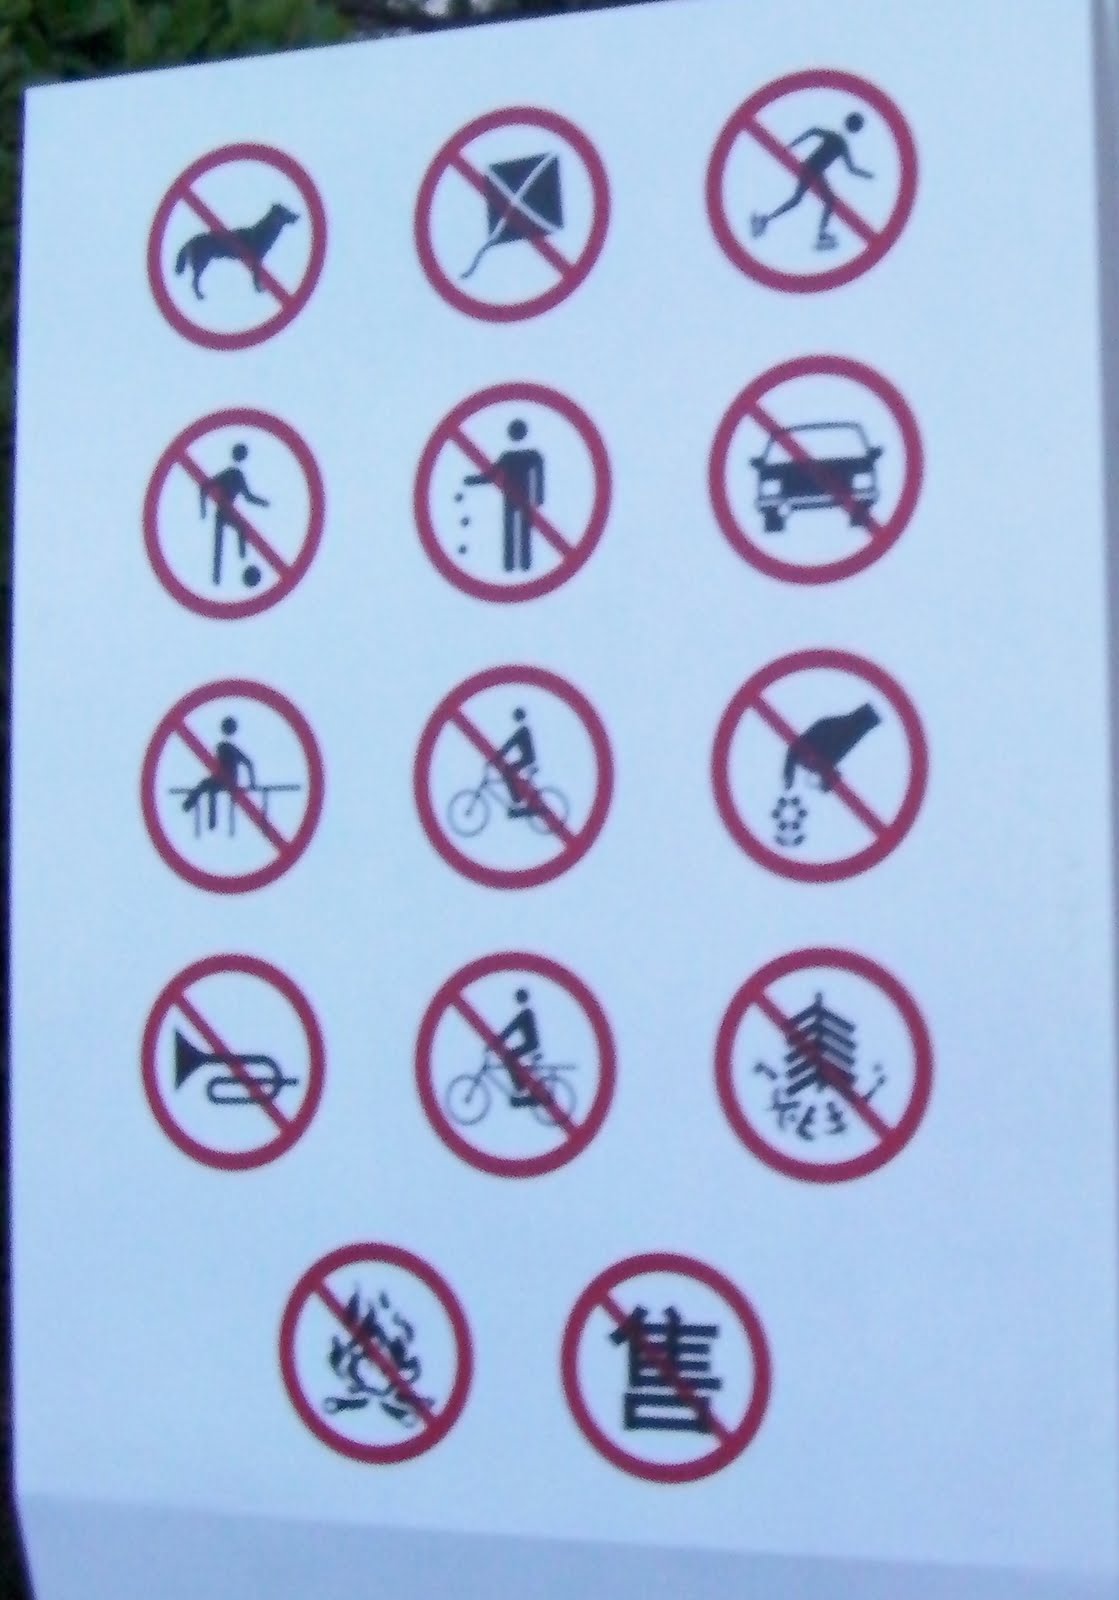 The "DONT'S" outside the Performing Arts Center